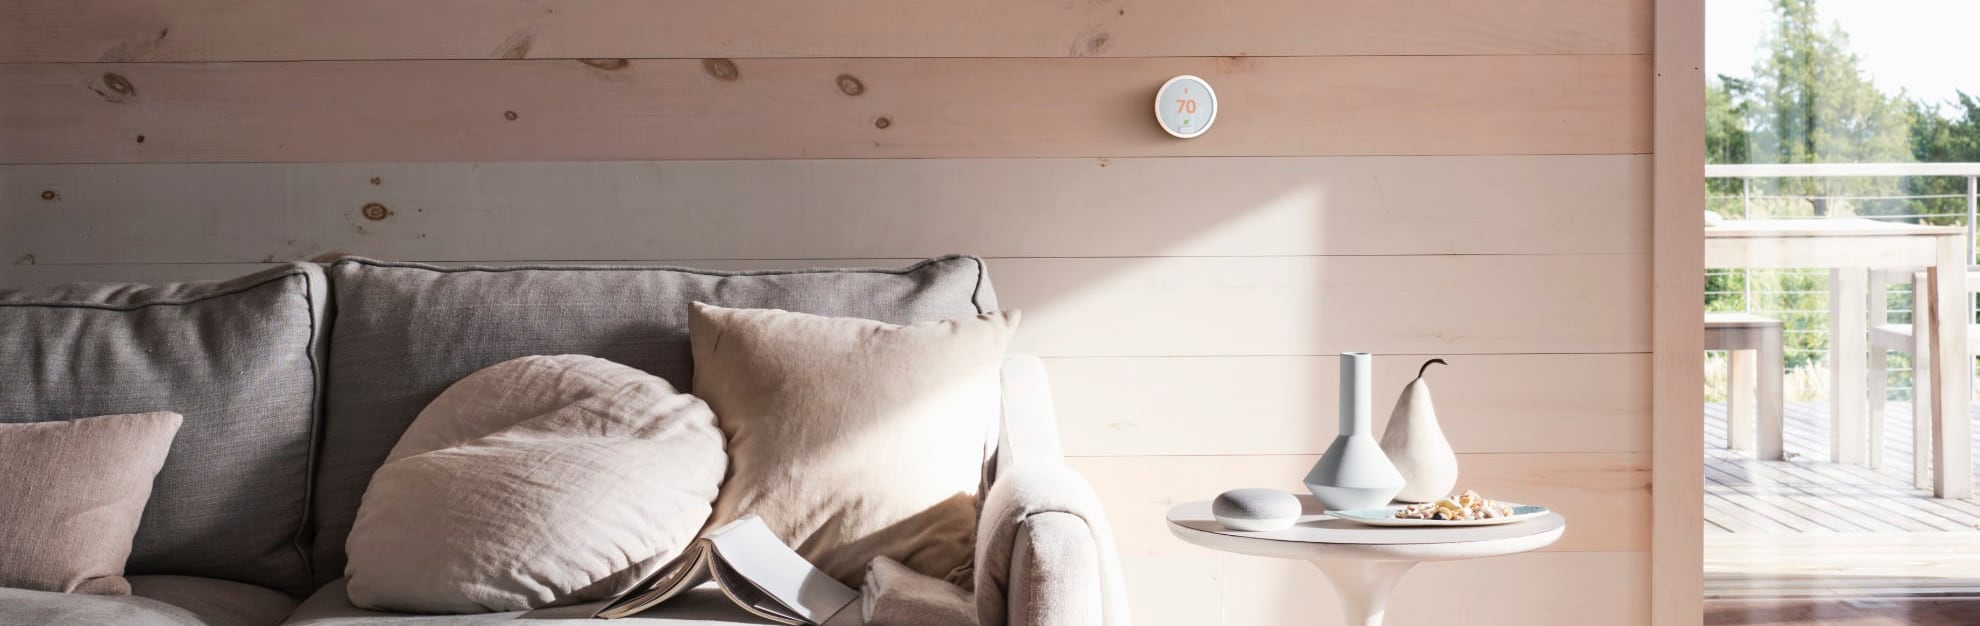 Vivint Home Automation in Tempe